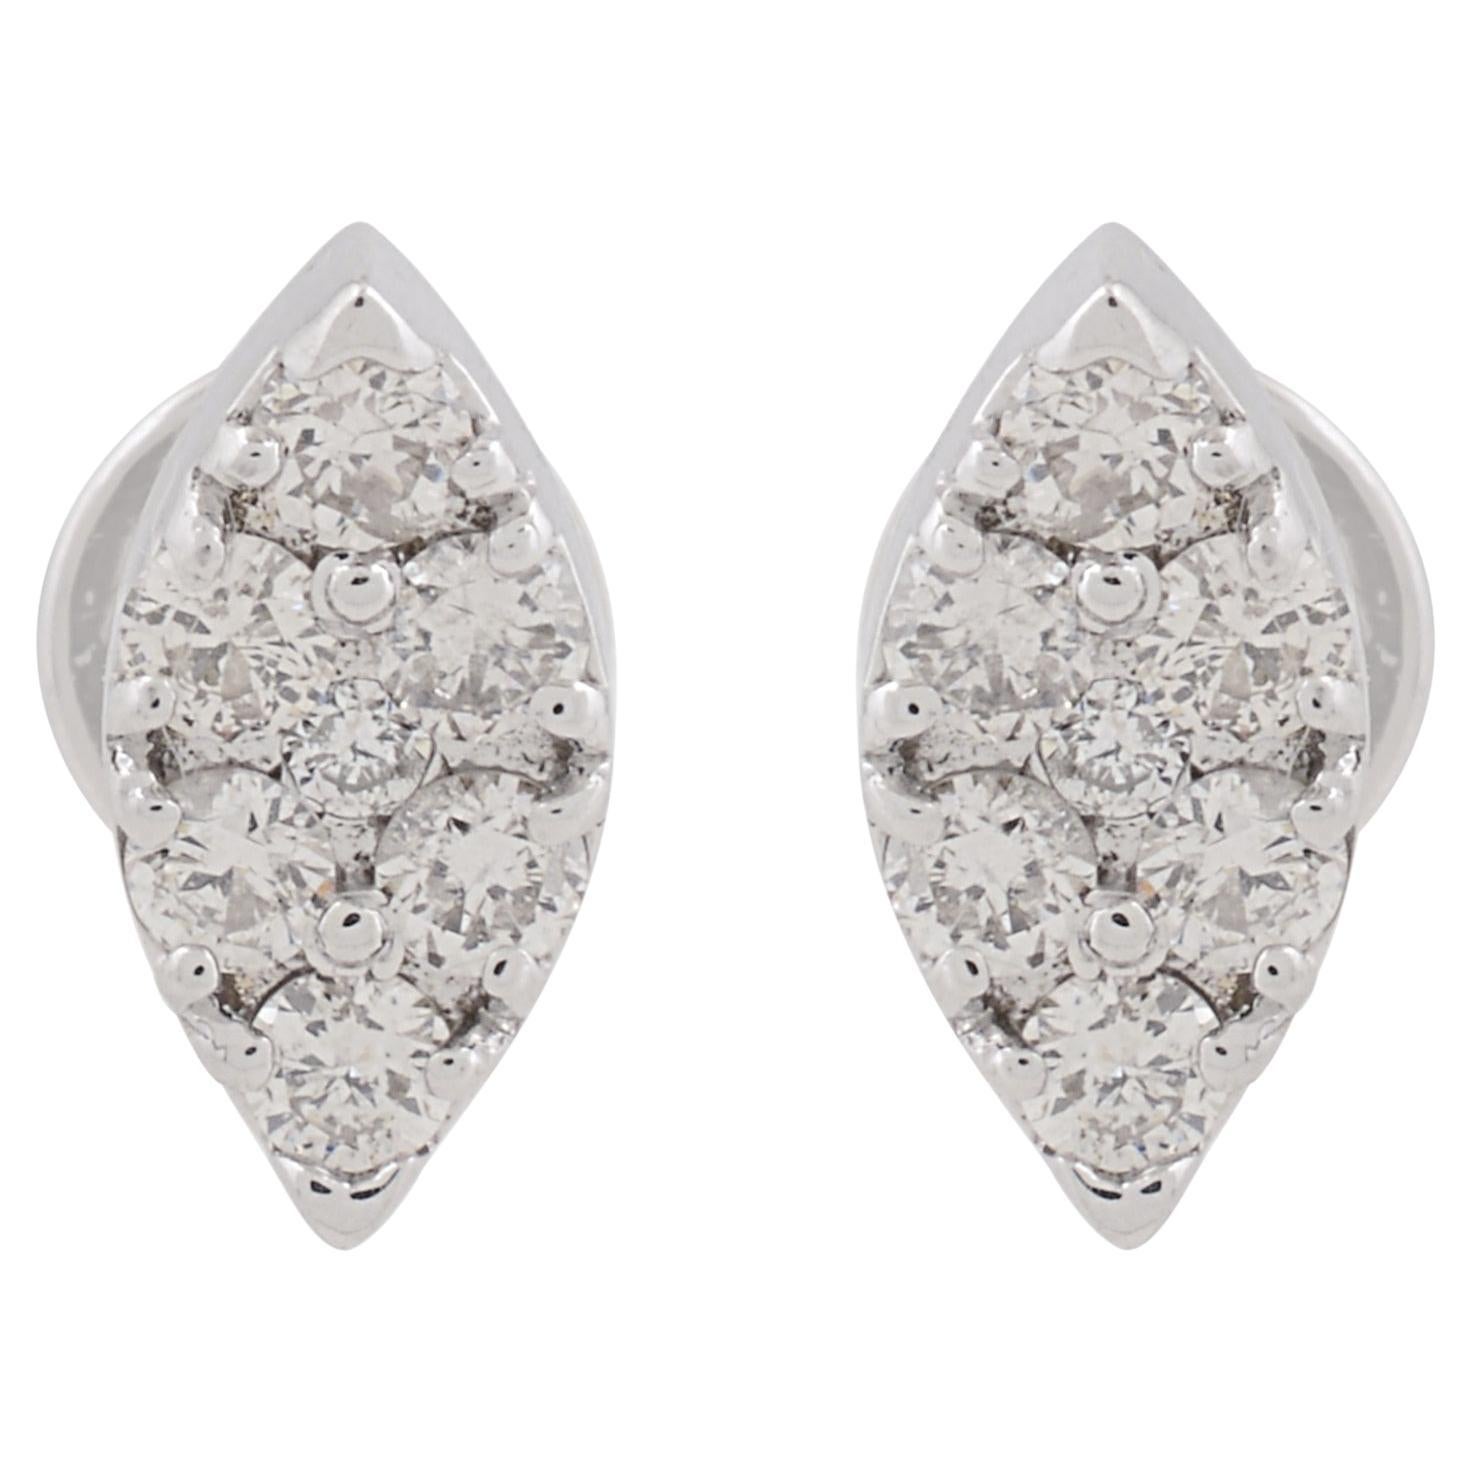 SI Clarity HI Color Round Diamond Marquise Stud Earrings 10 Karat White Gold